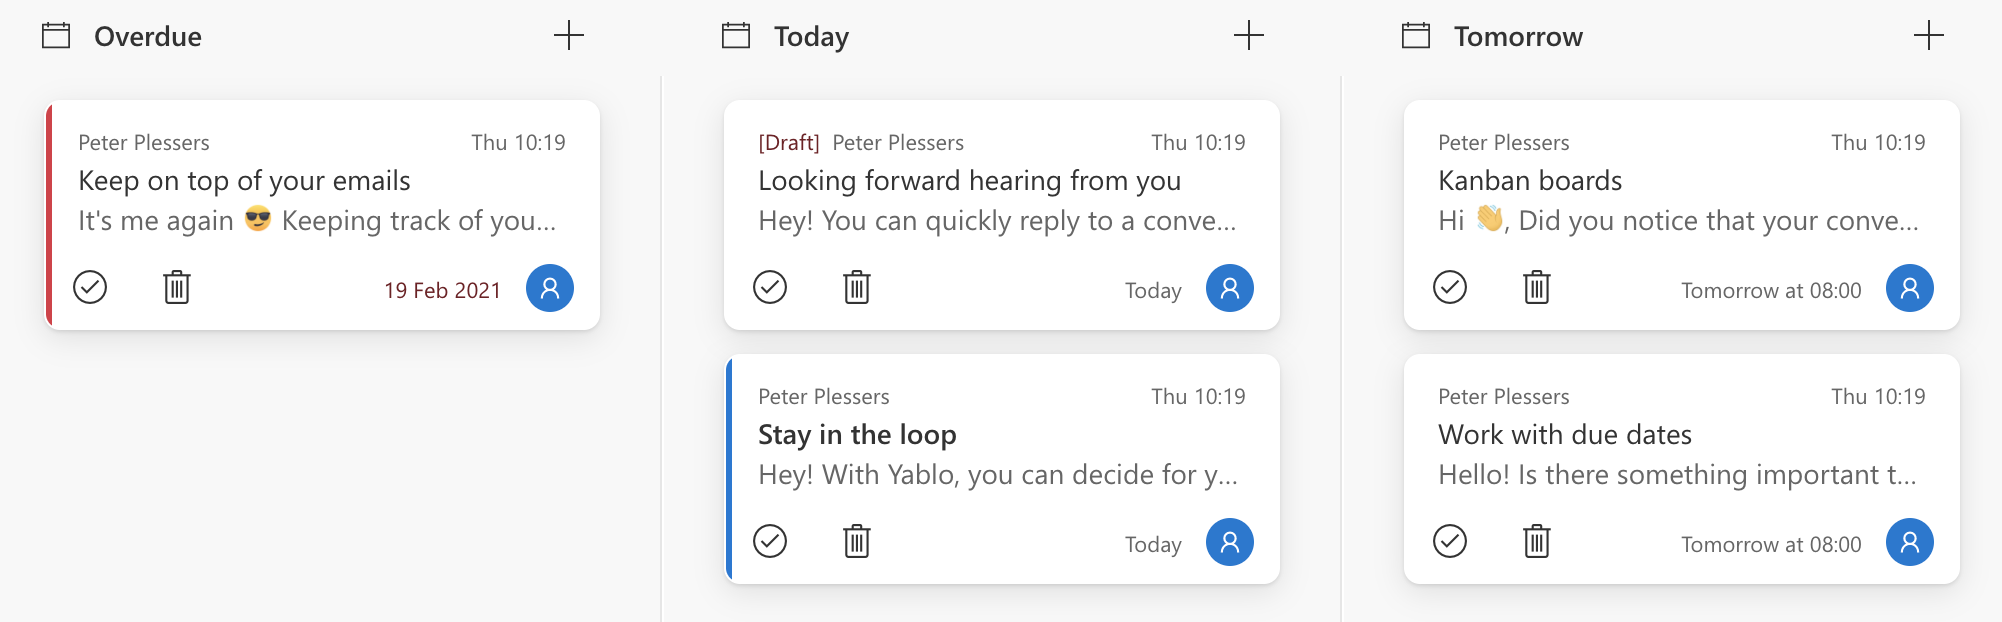 Organize your conversations by due date